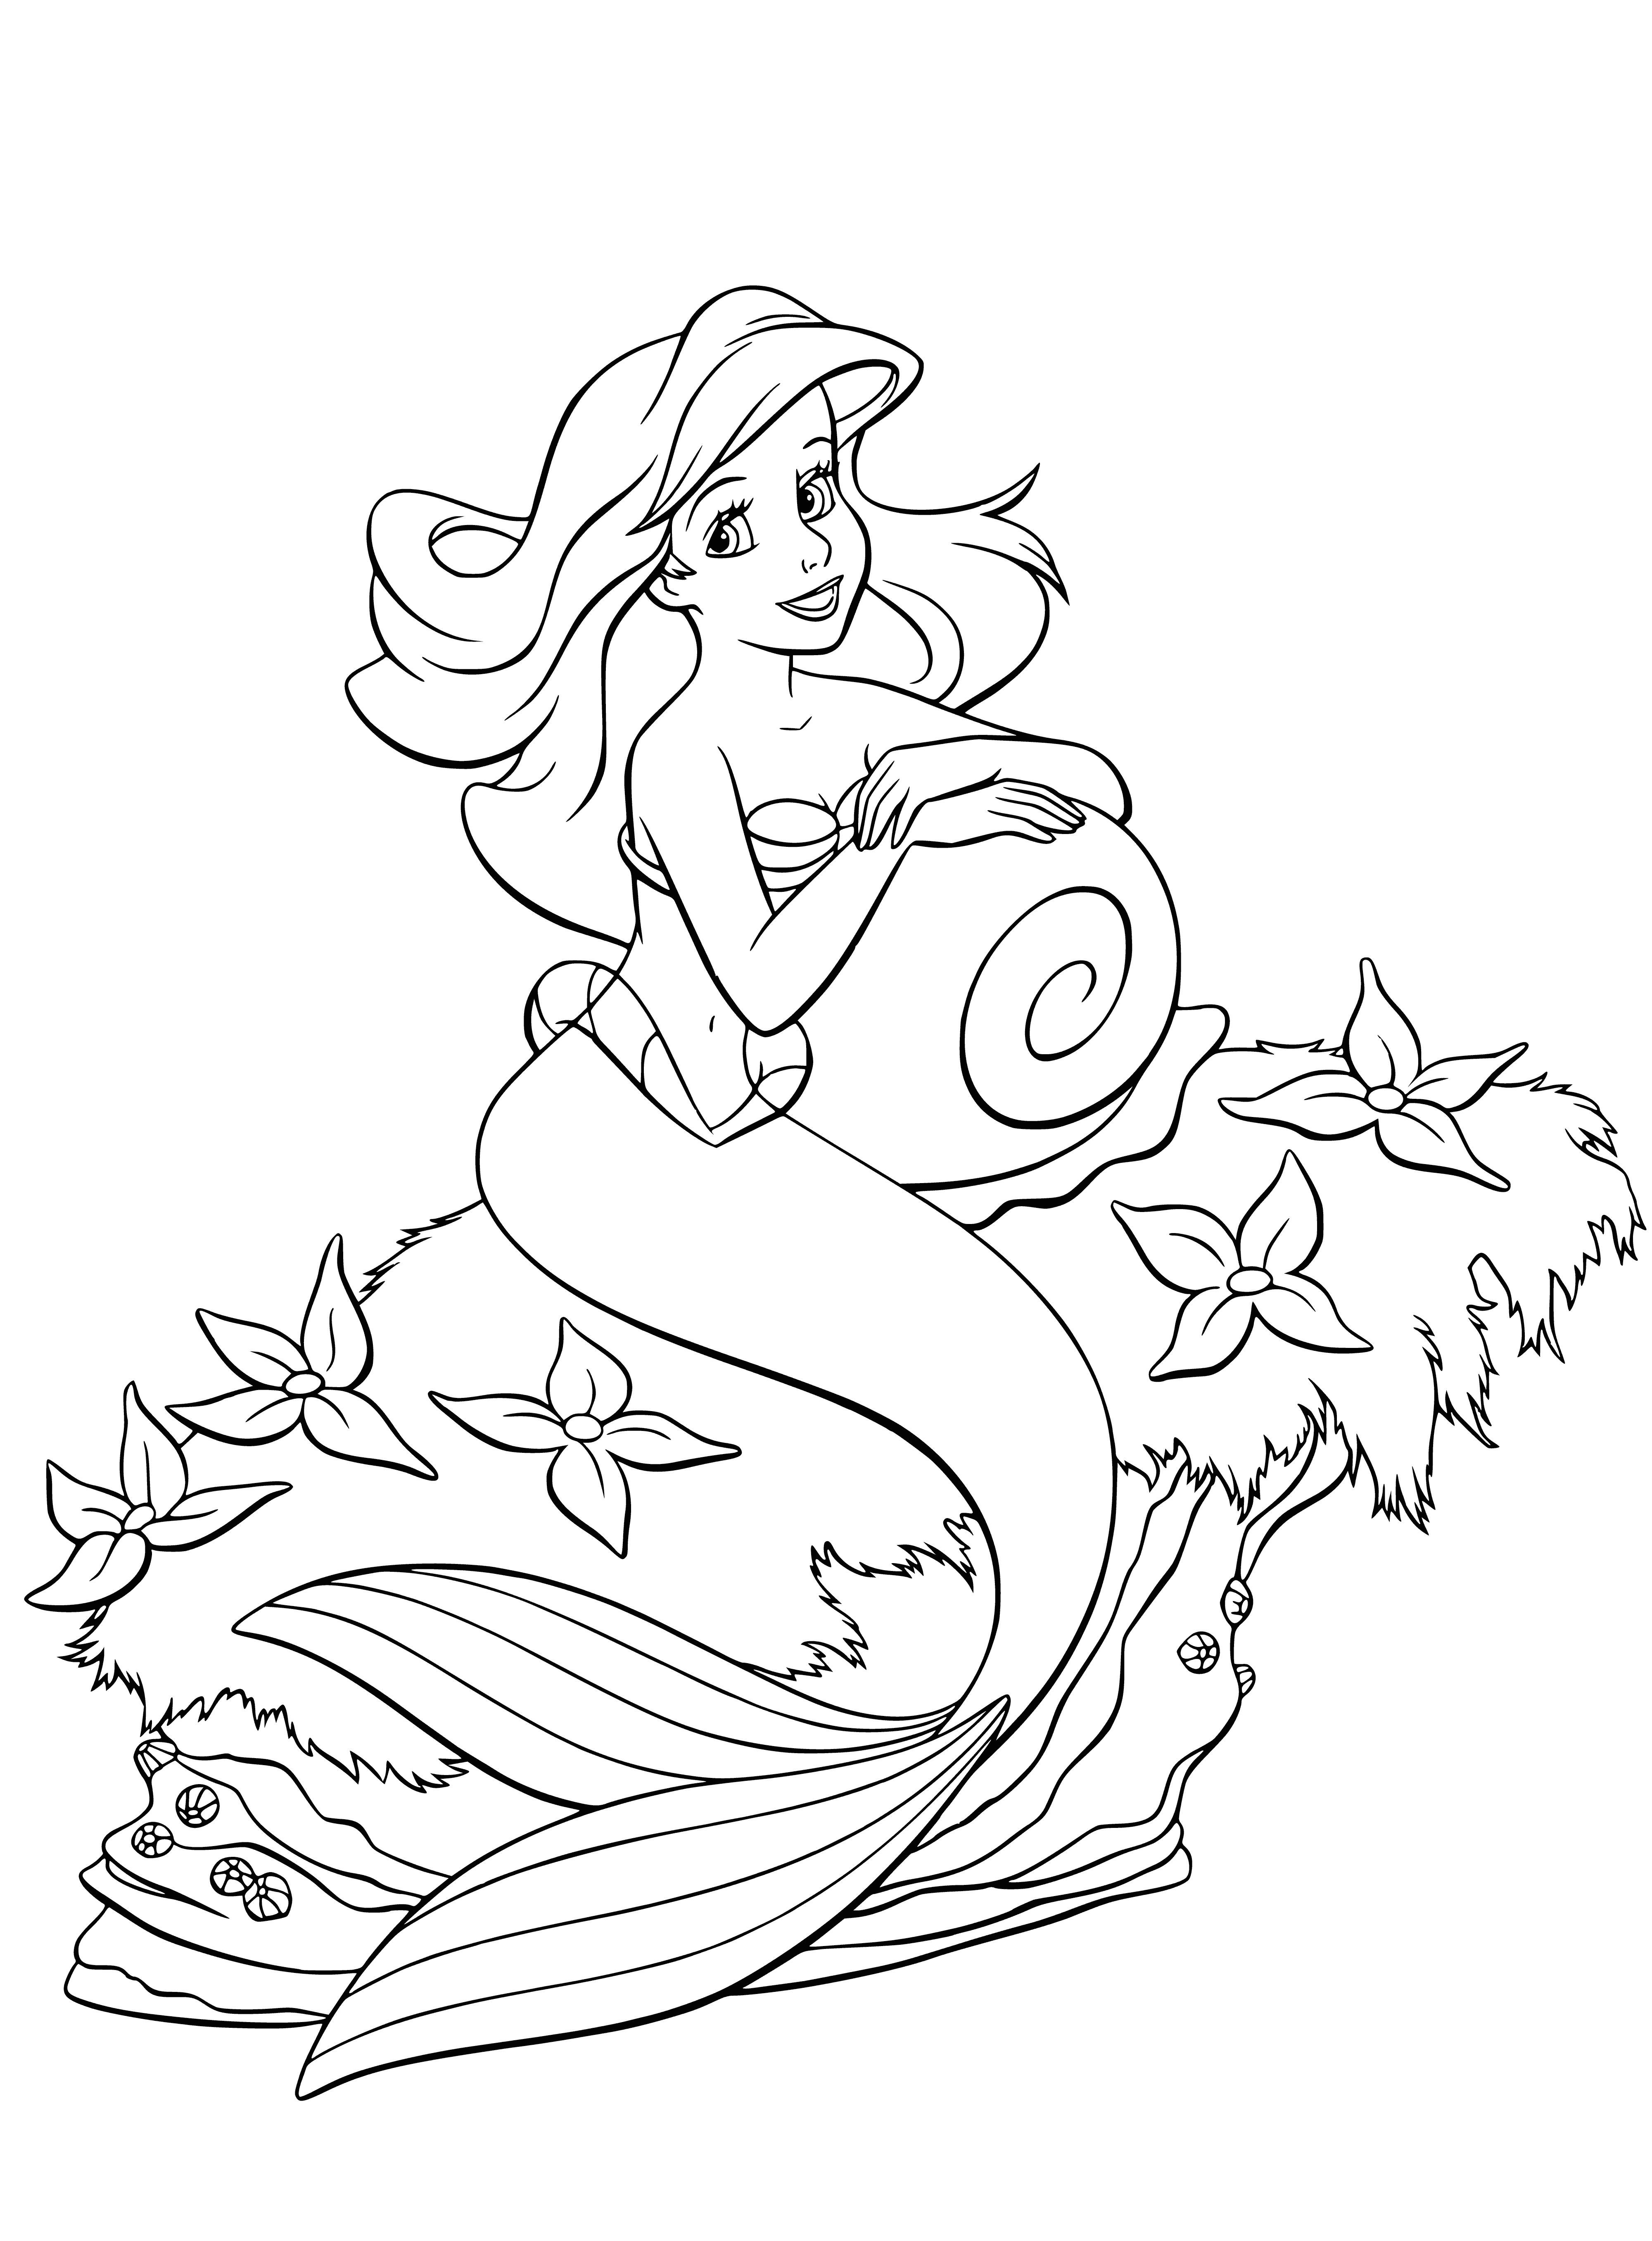 coloring page: Little mermaid Ariel sits on a rock in the water in a bikini top and fishtail, holding a shell and wearing a coral necklace. #DisneyPrincess